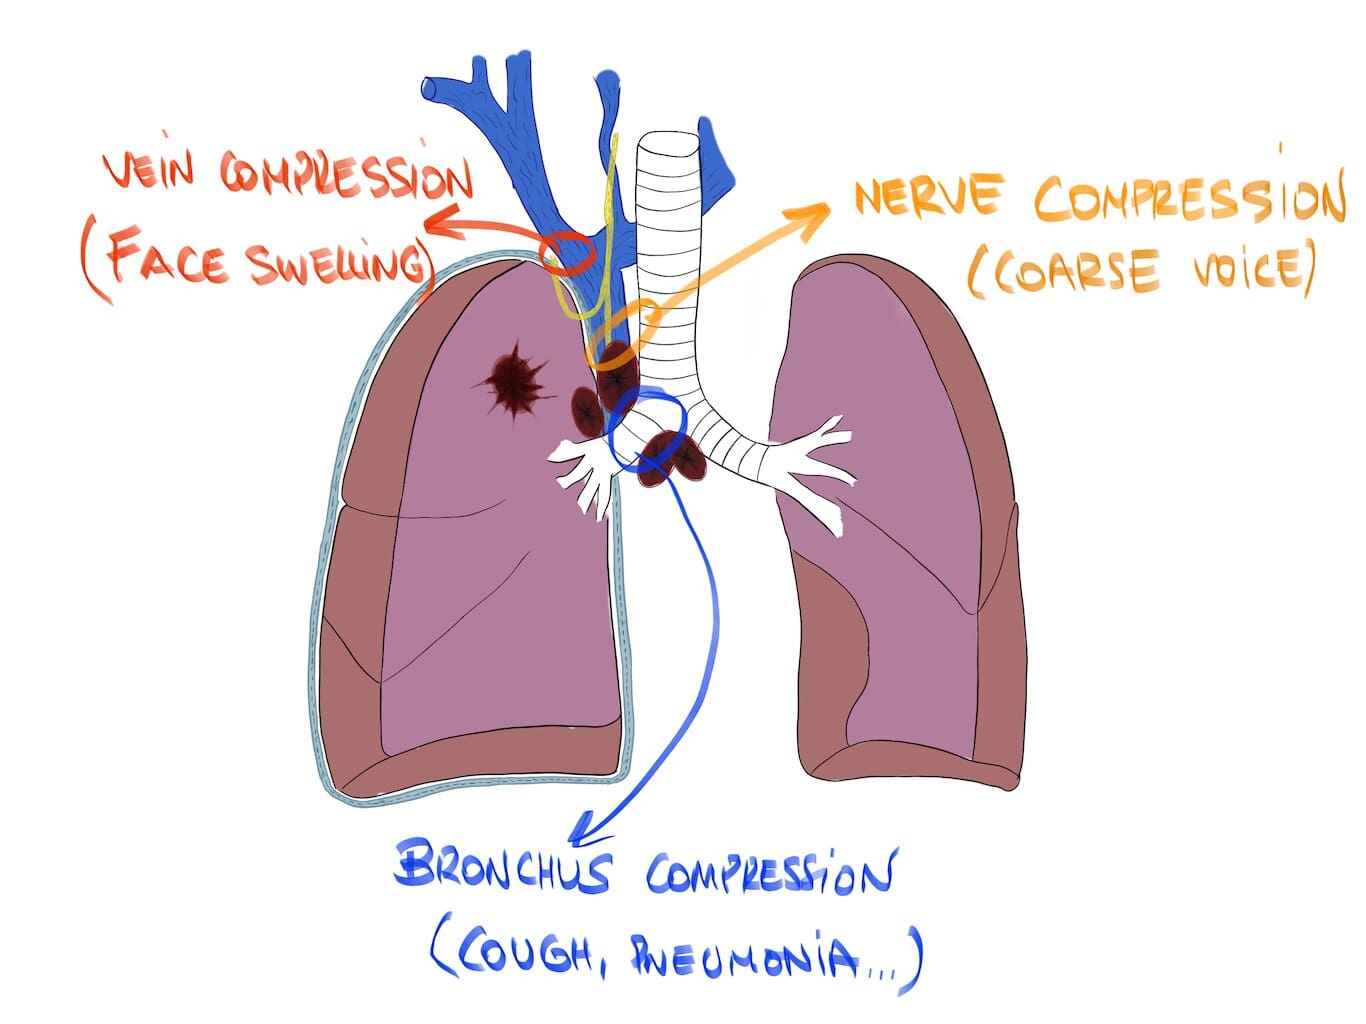 lung tumor compressing the nerve (coarse voice), the bronchus (cough and pneumonia) and the vein (face swelling)